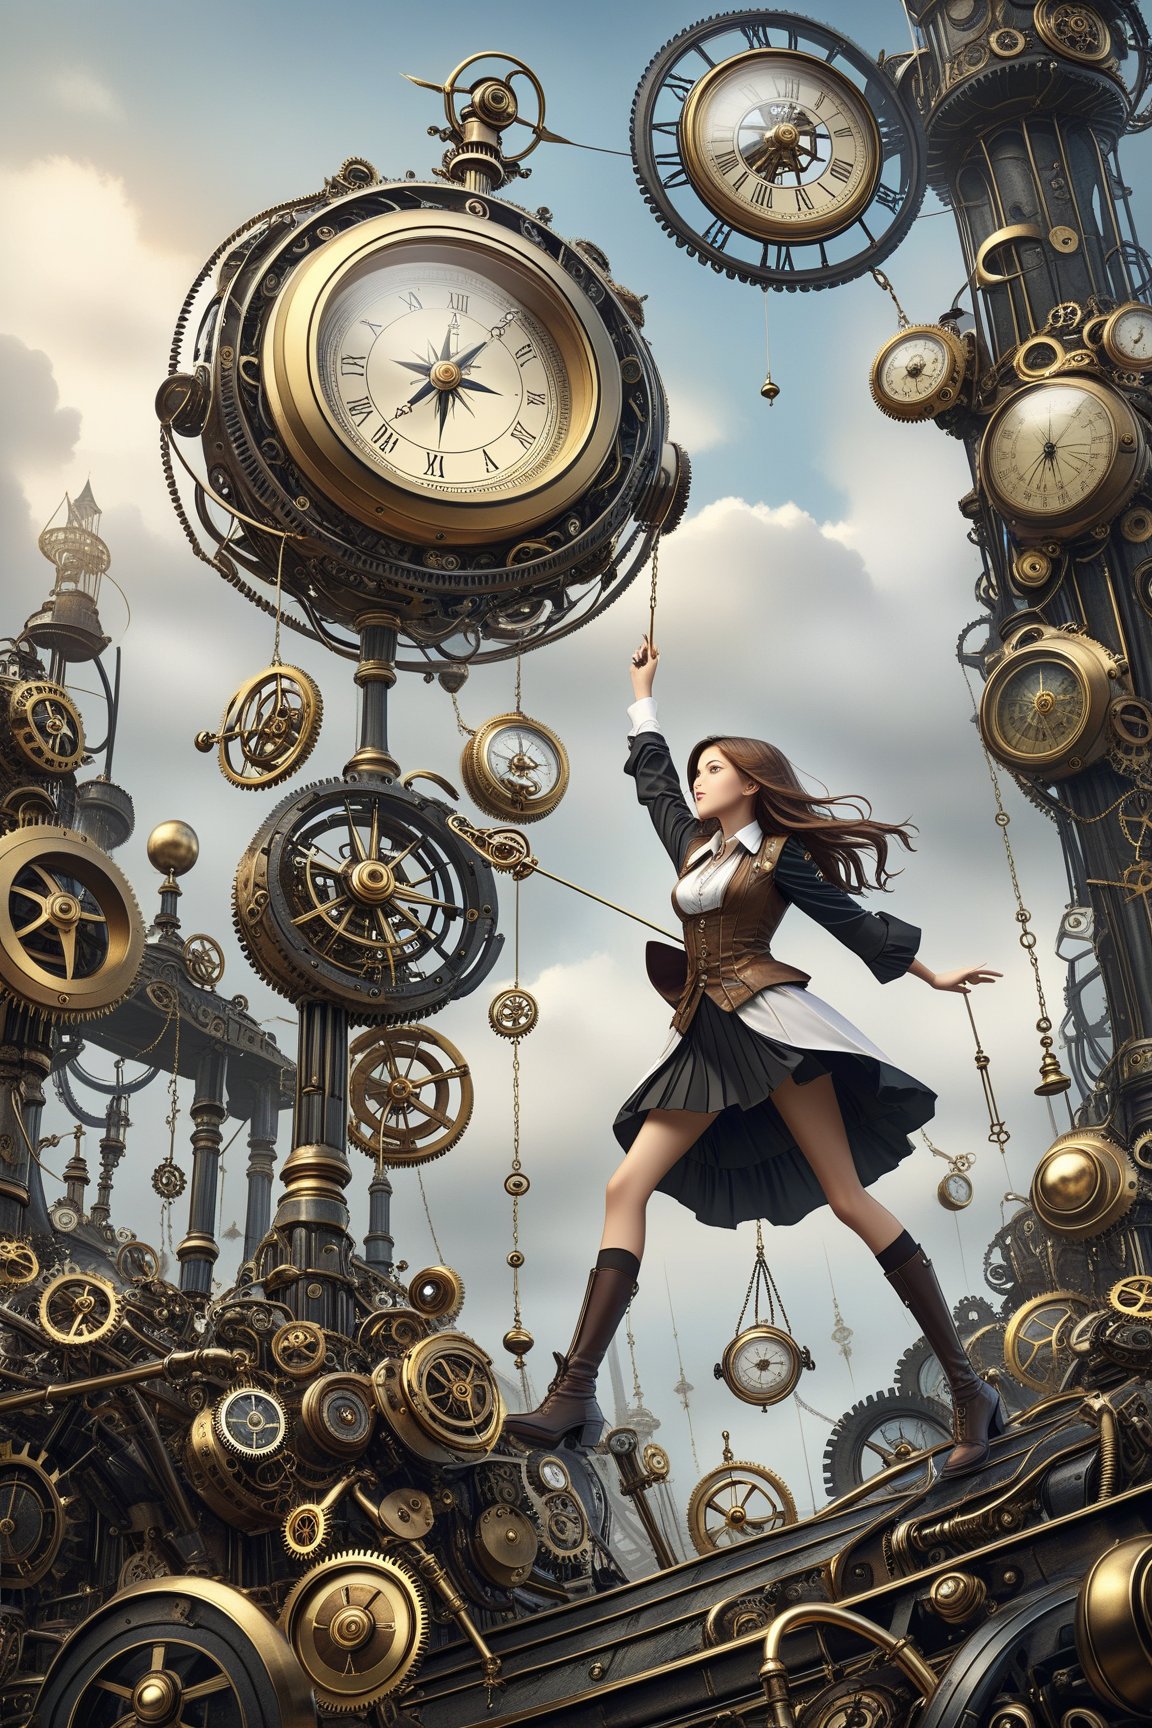 create a beautiful magical steampunk fantasy scene where you can evidence, A compass with a swinging pendulum pointing the right direction even amidst confusion. ,.Mechanical,DonMSt34mPXL